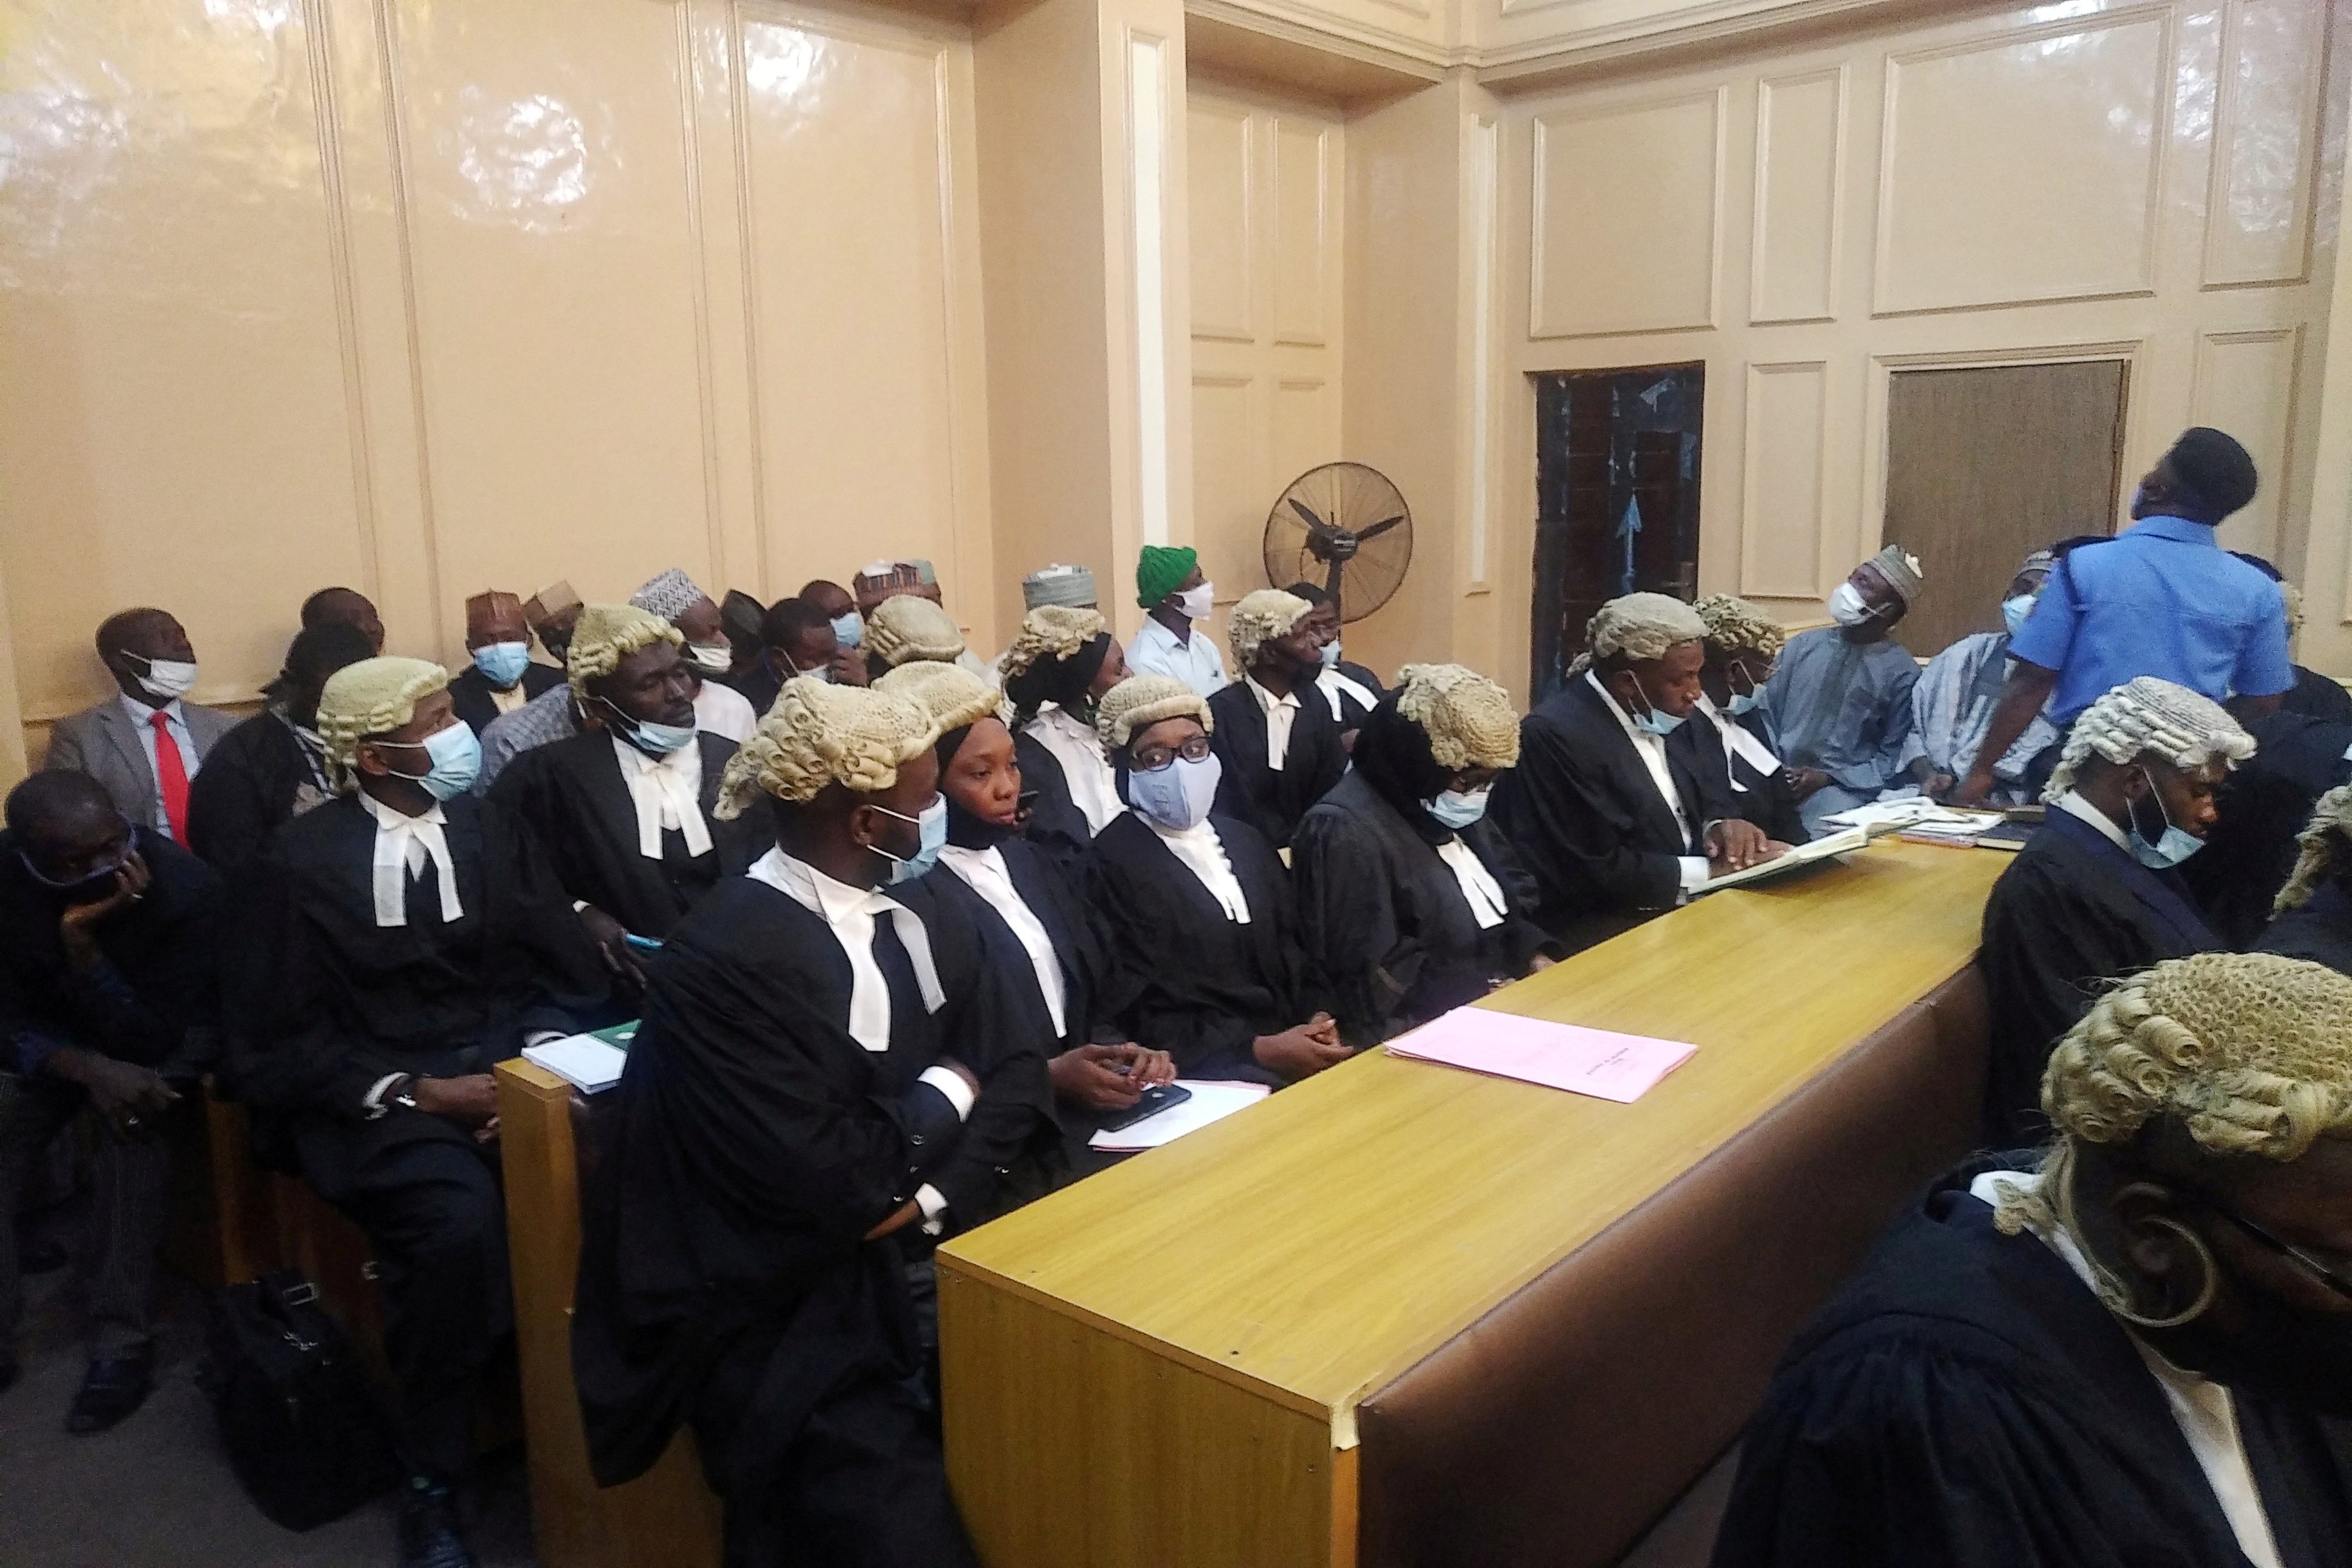 General view of a cross session of lawyers in a court during a hearing of a blasphemy case in Kano